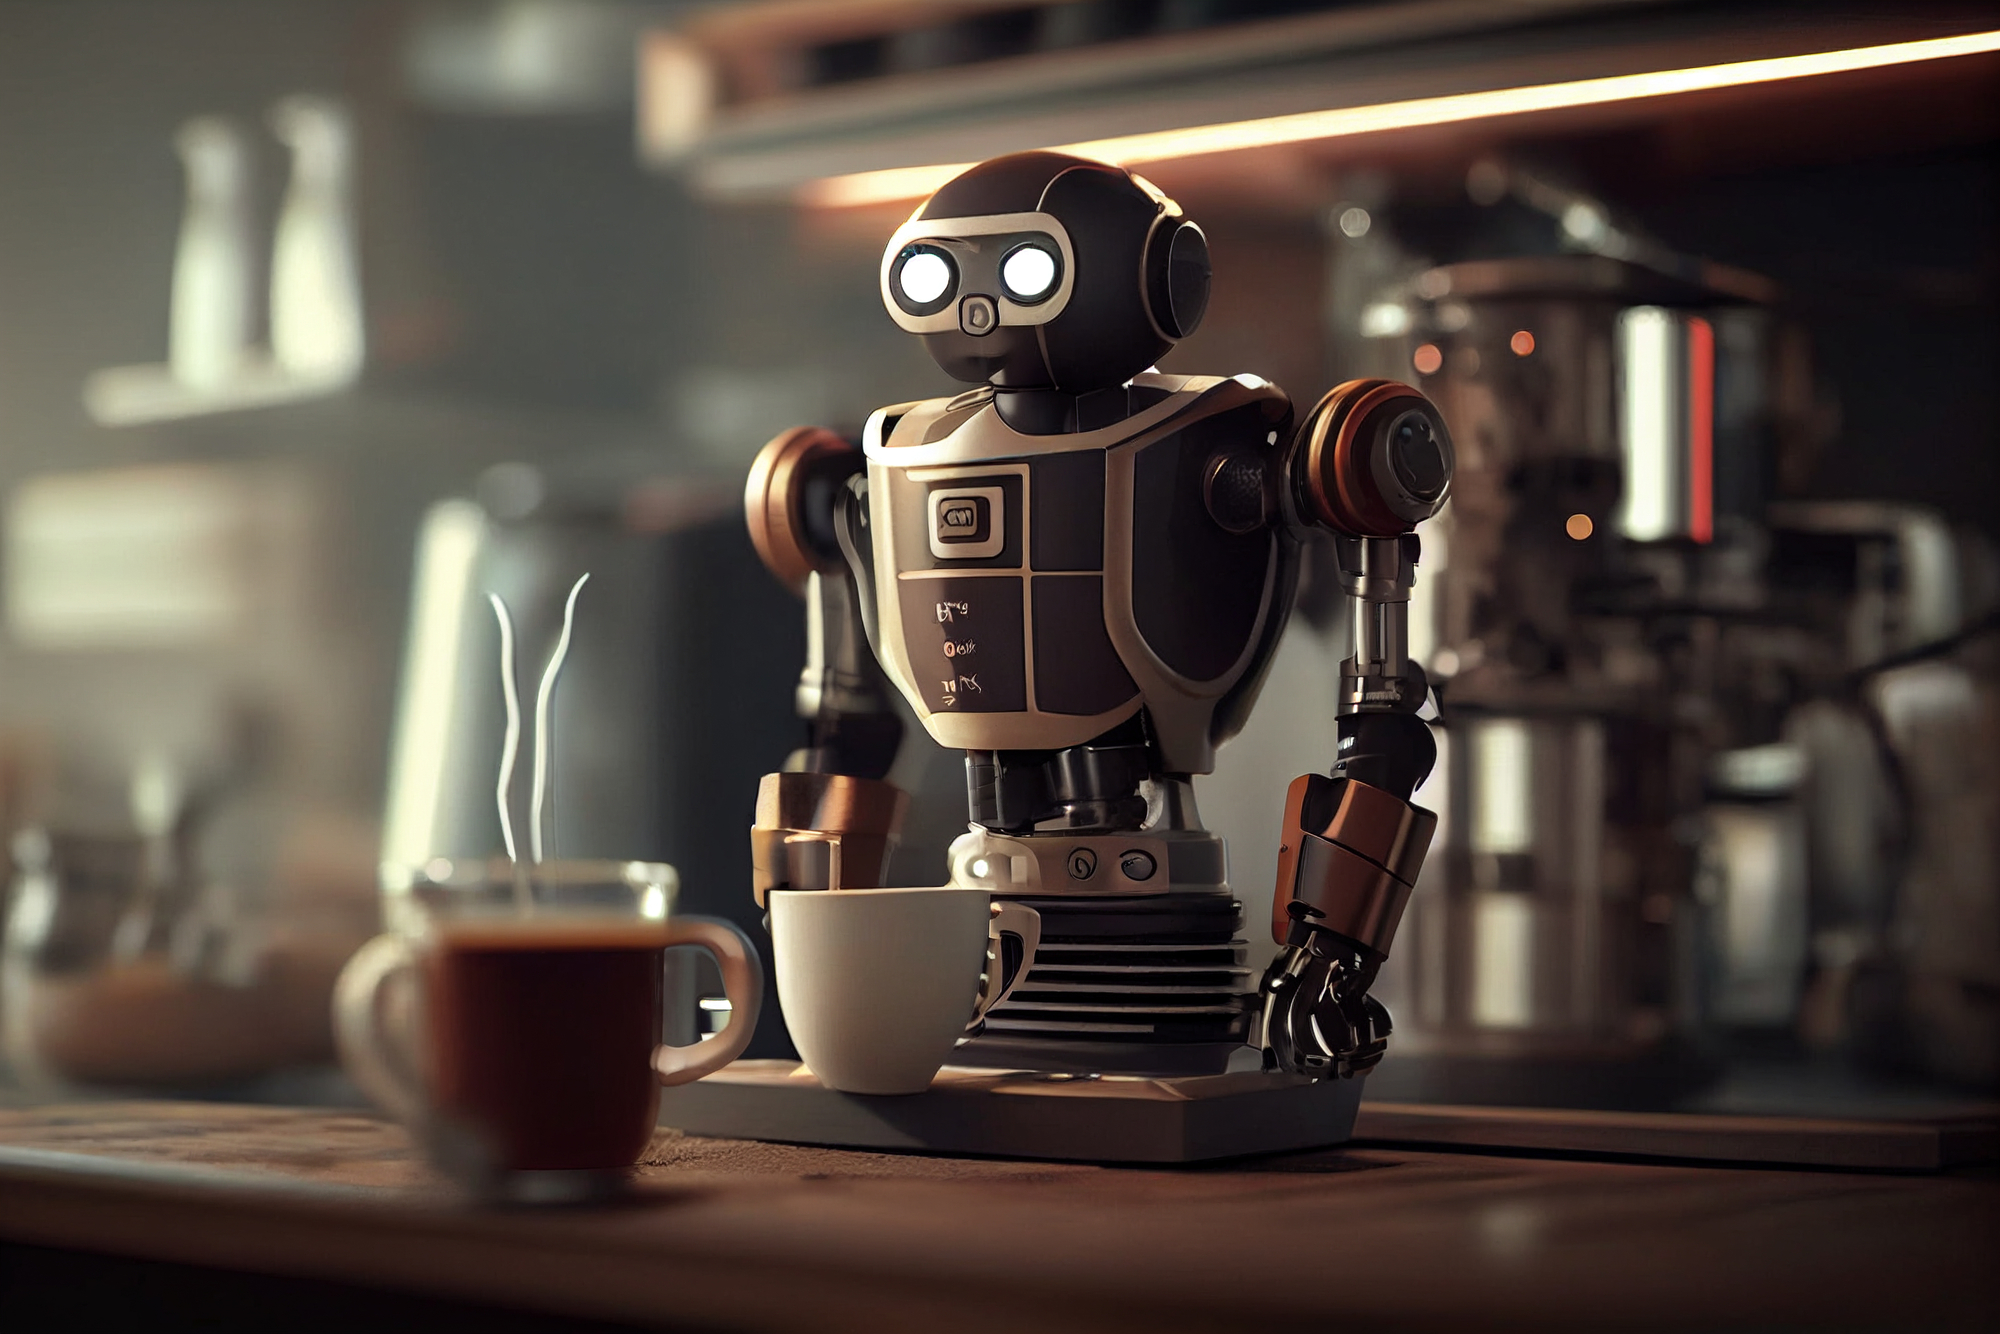 robot coffee machine maker in central cafe. Futuristic concept. smart robot makes coffee. High quality illustration